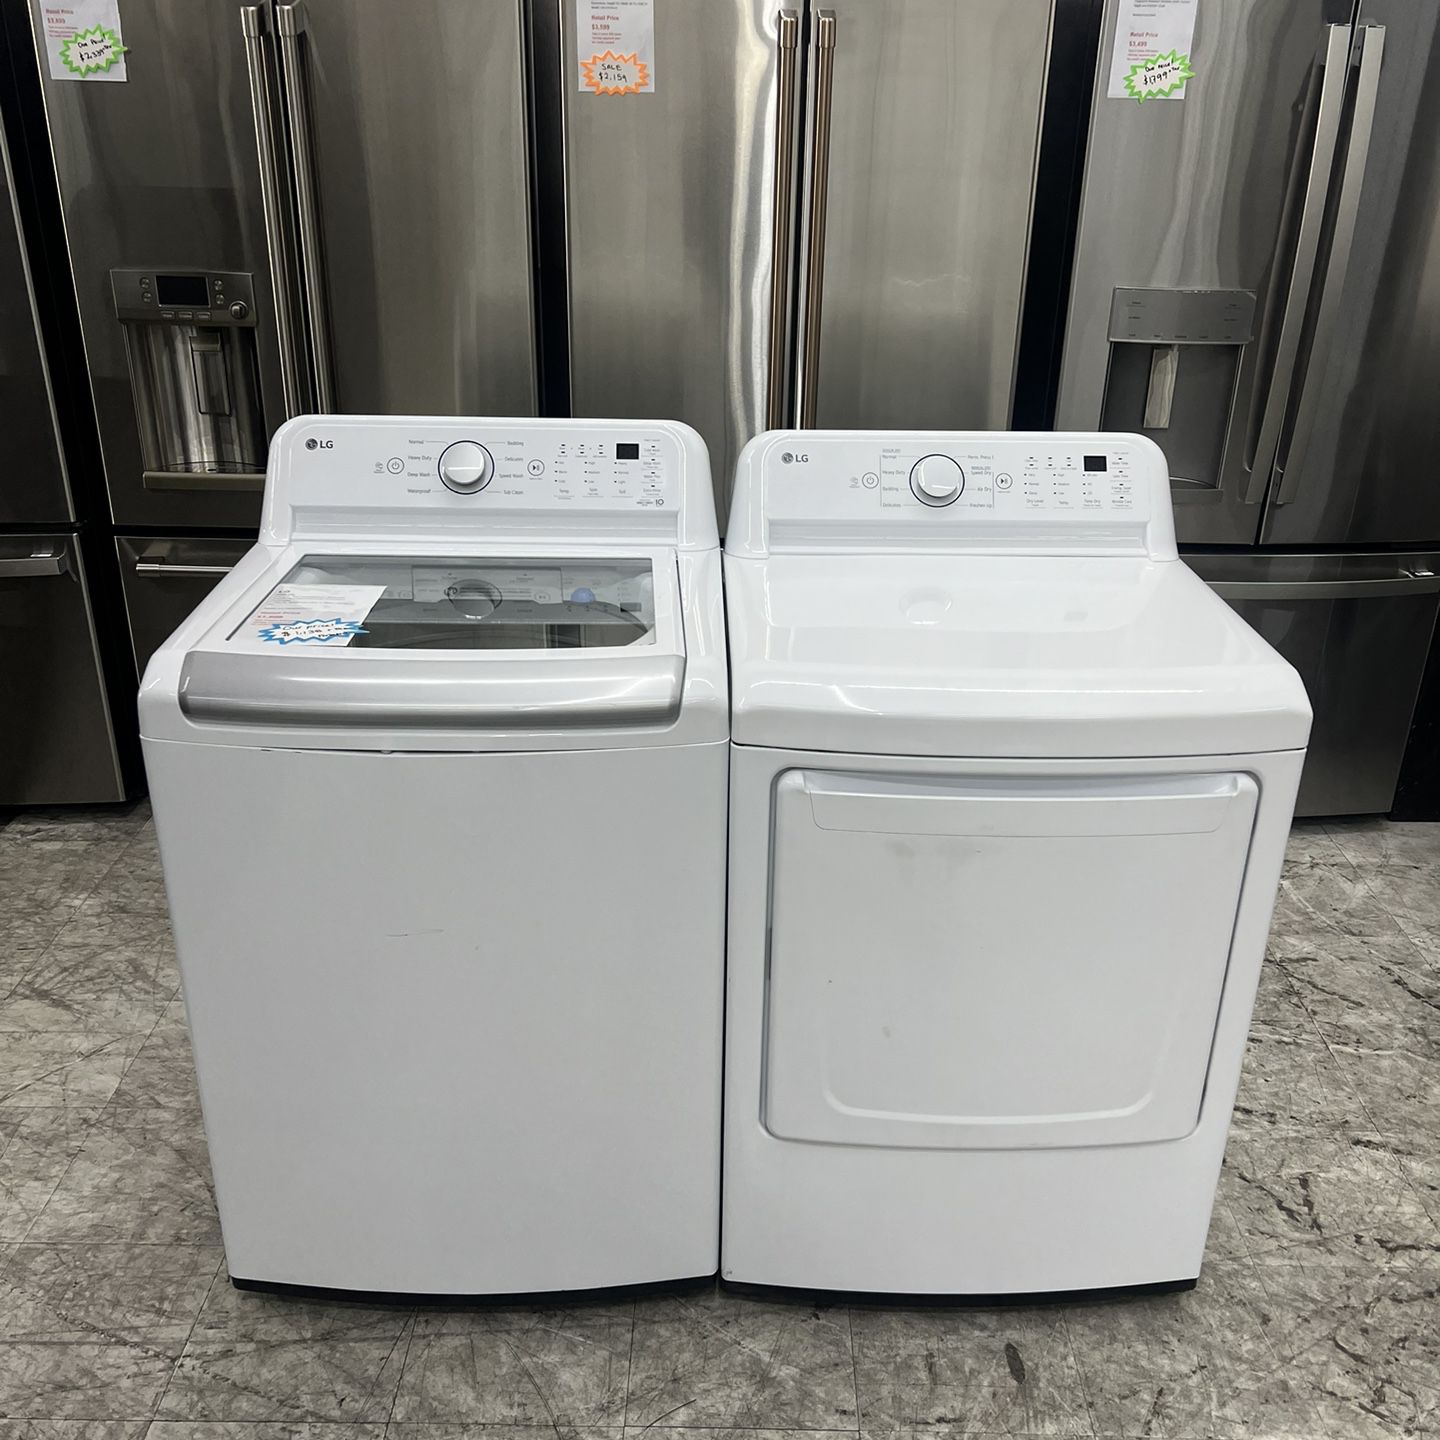 LG 5.0 cuft top load washer and gas dryer high efficiency